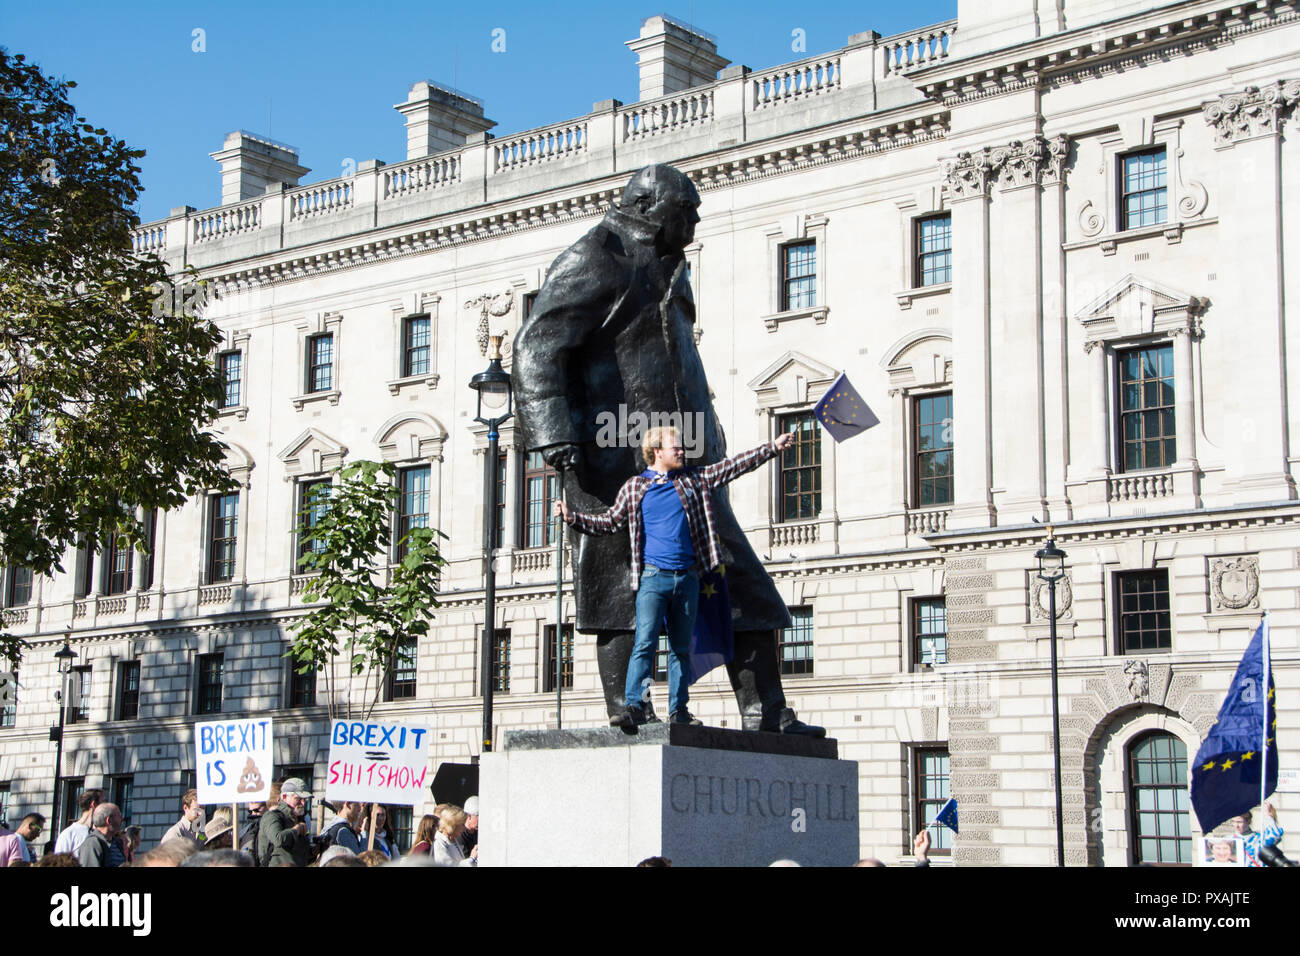 London, England, UK. 20 October, 2018.  More than 600,000 people took part in today's People's Vote march to Parliament Square © Benjamin John/ Alamy Stock Photo